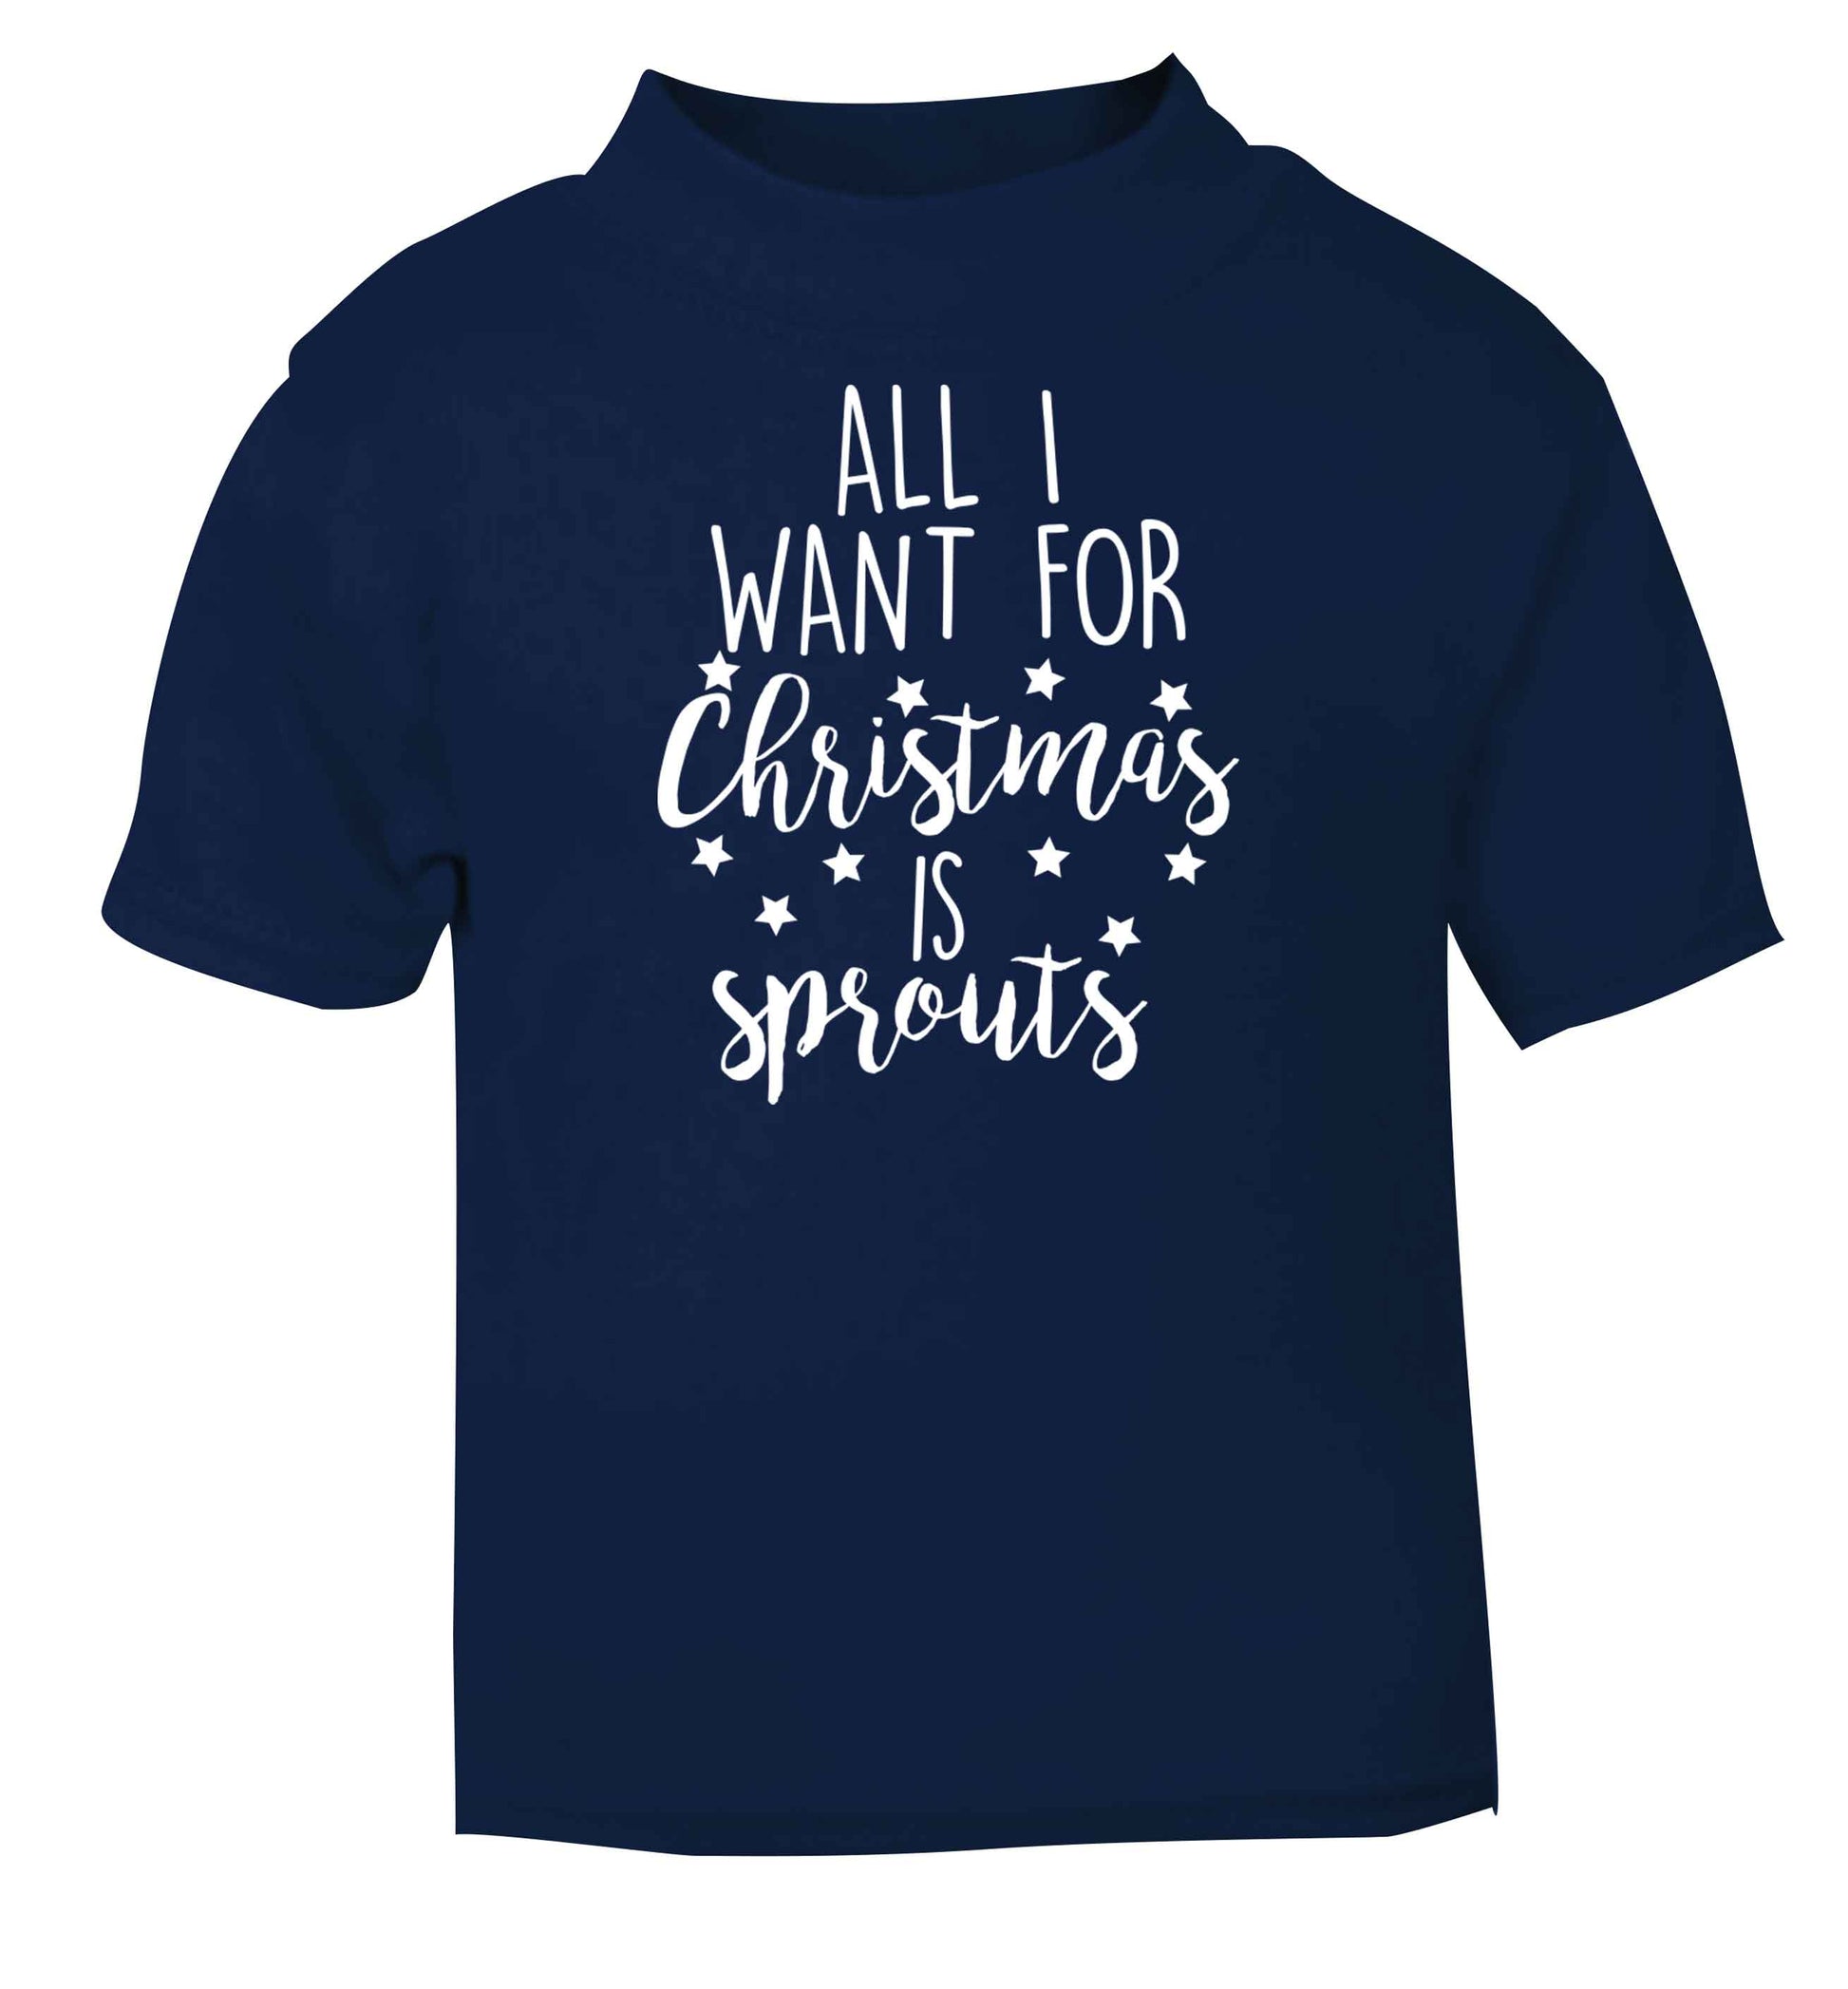 All I want for Christmas is sprouts navy baby toddler Tshirt 2 Years